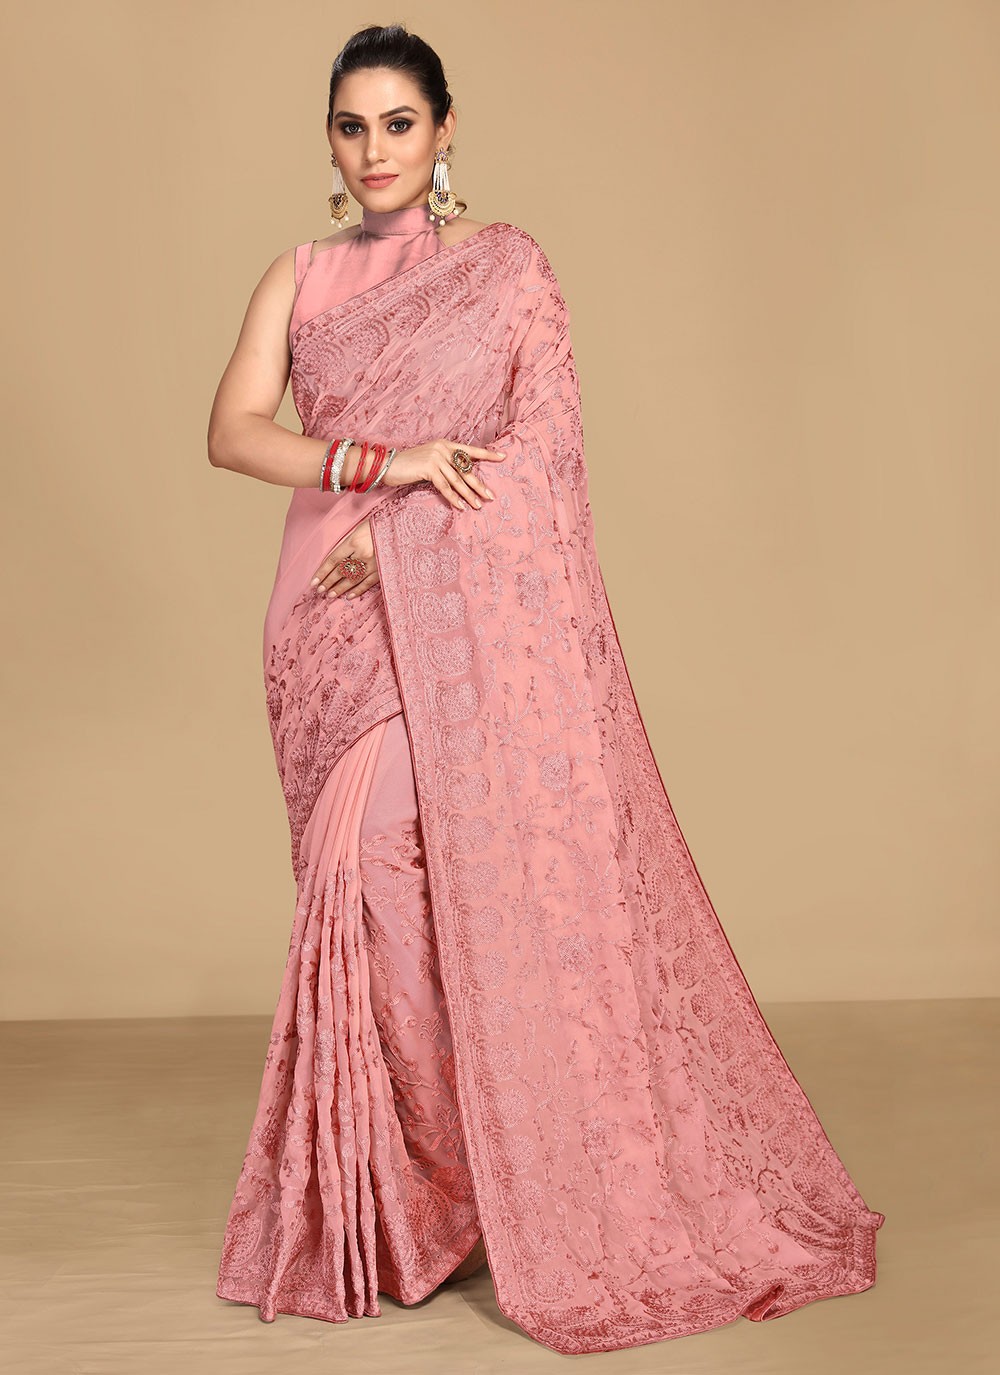 Georgette Pink Contemporary Style Saree